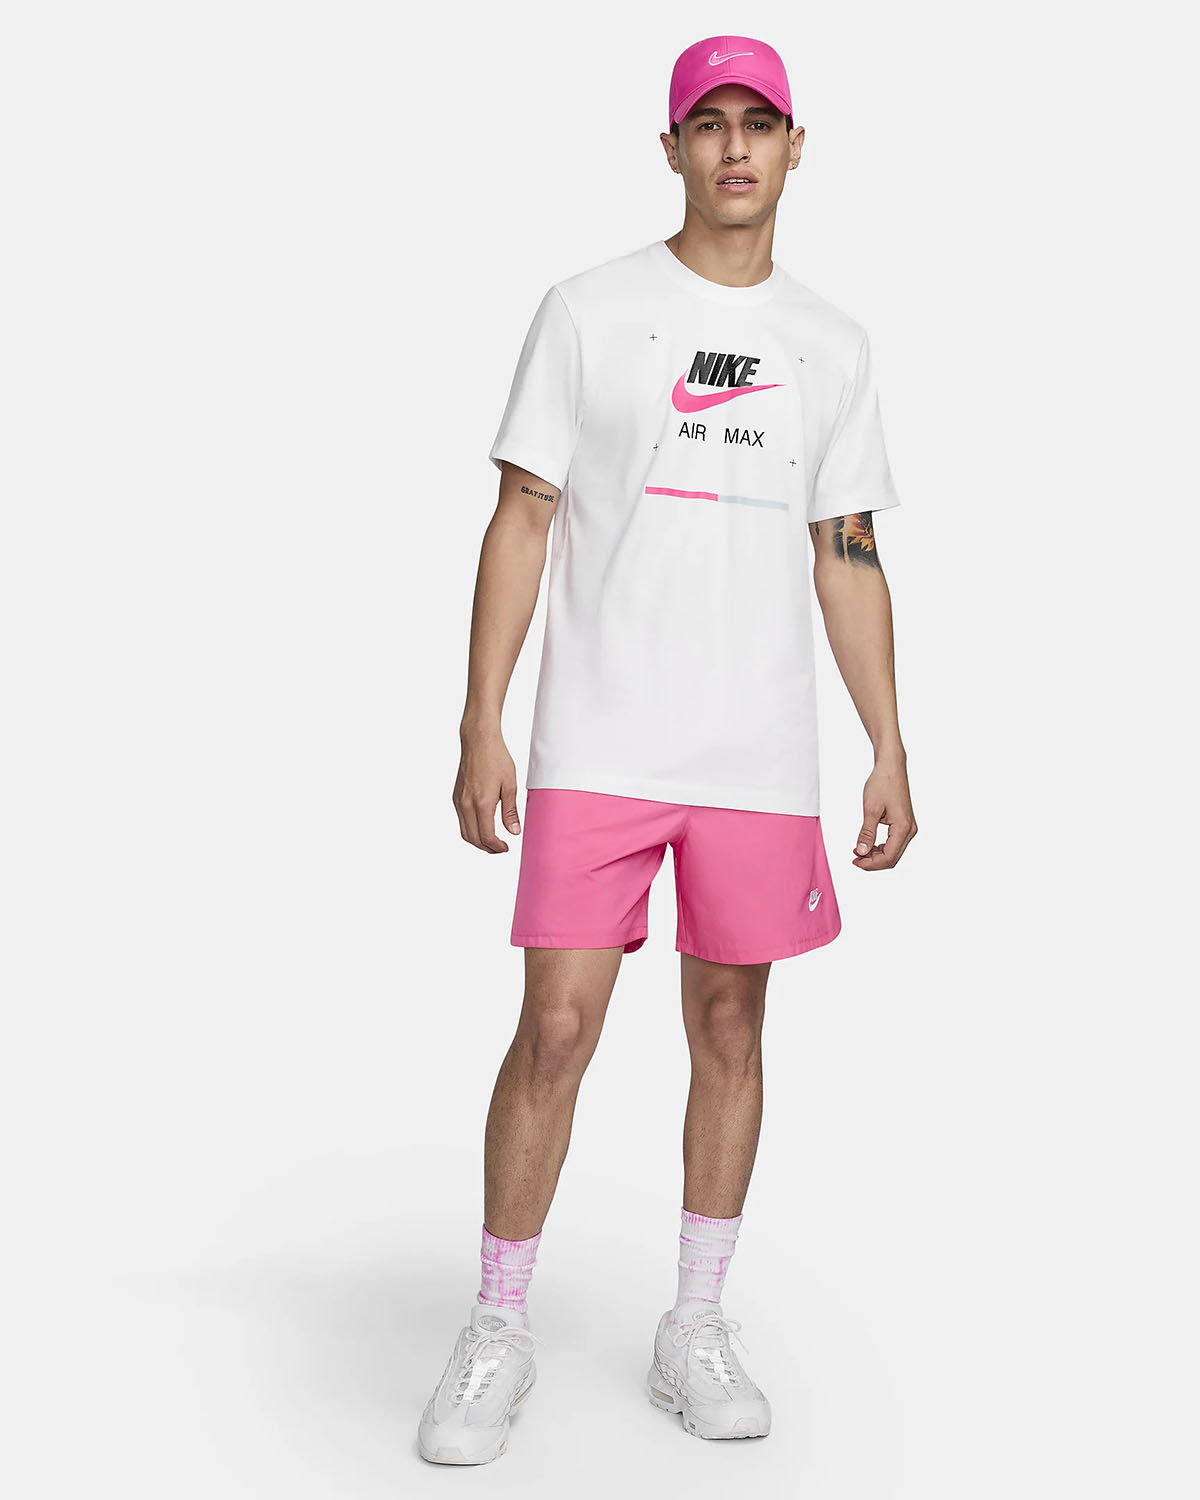 Nike Air Max T Shirt White Playful Pink Outfit